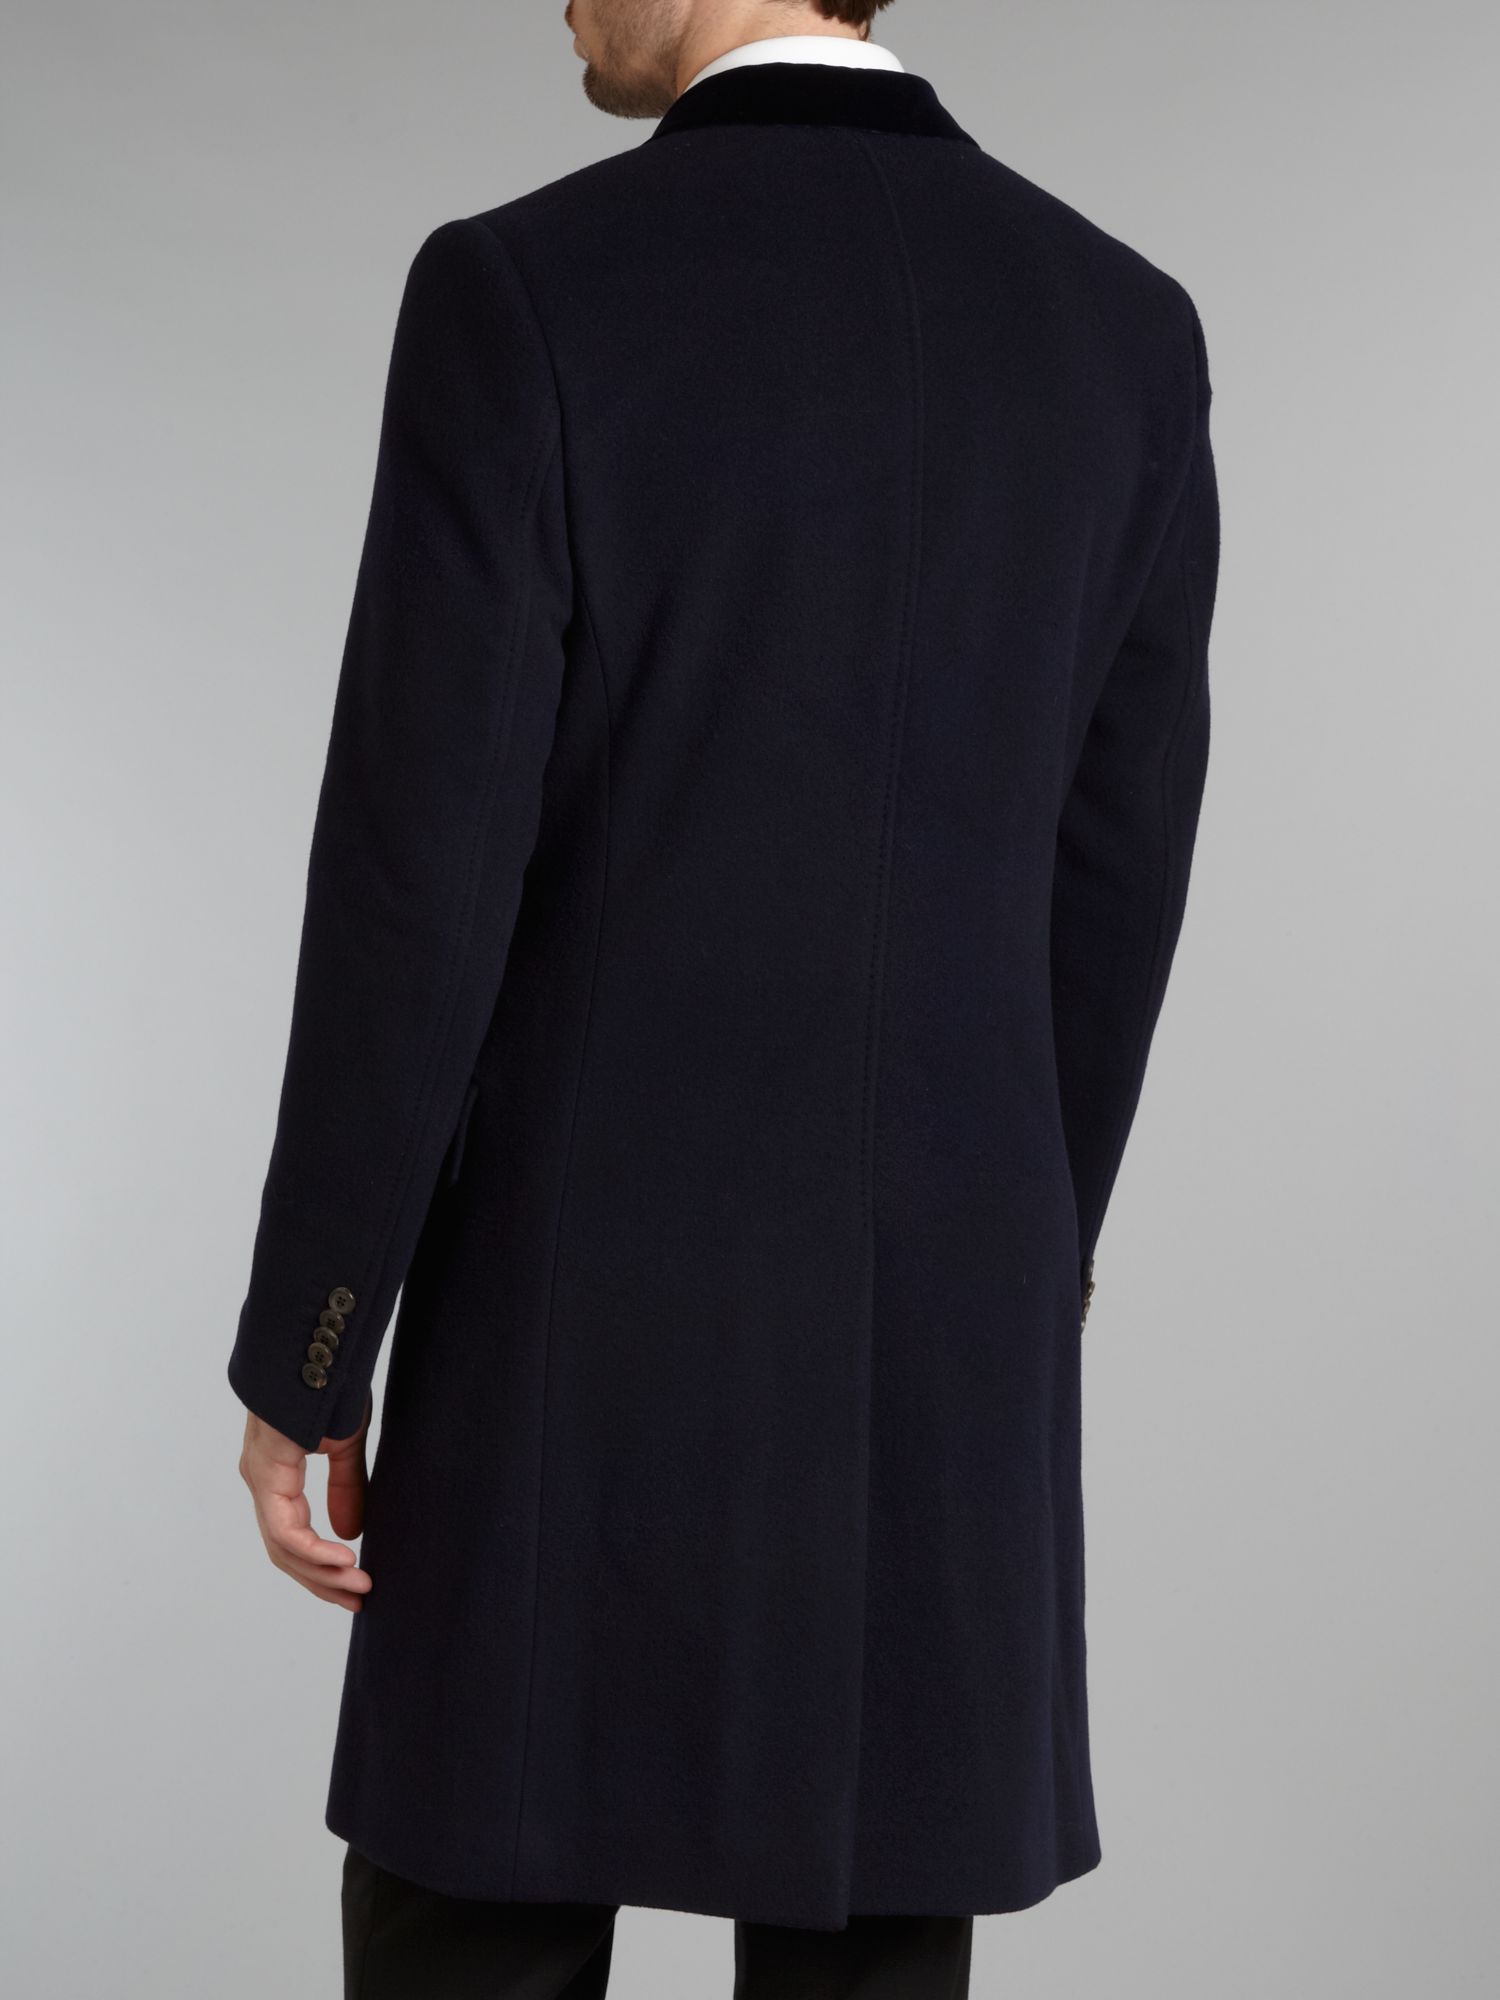 Paul smith Wool Cashmere Epsom Coat in Blue for Men | Lyst